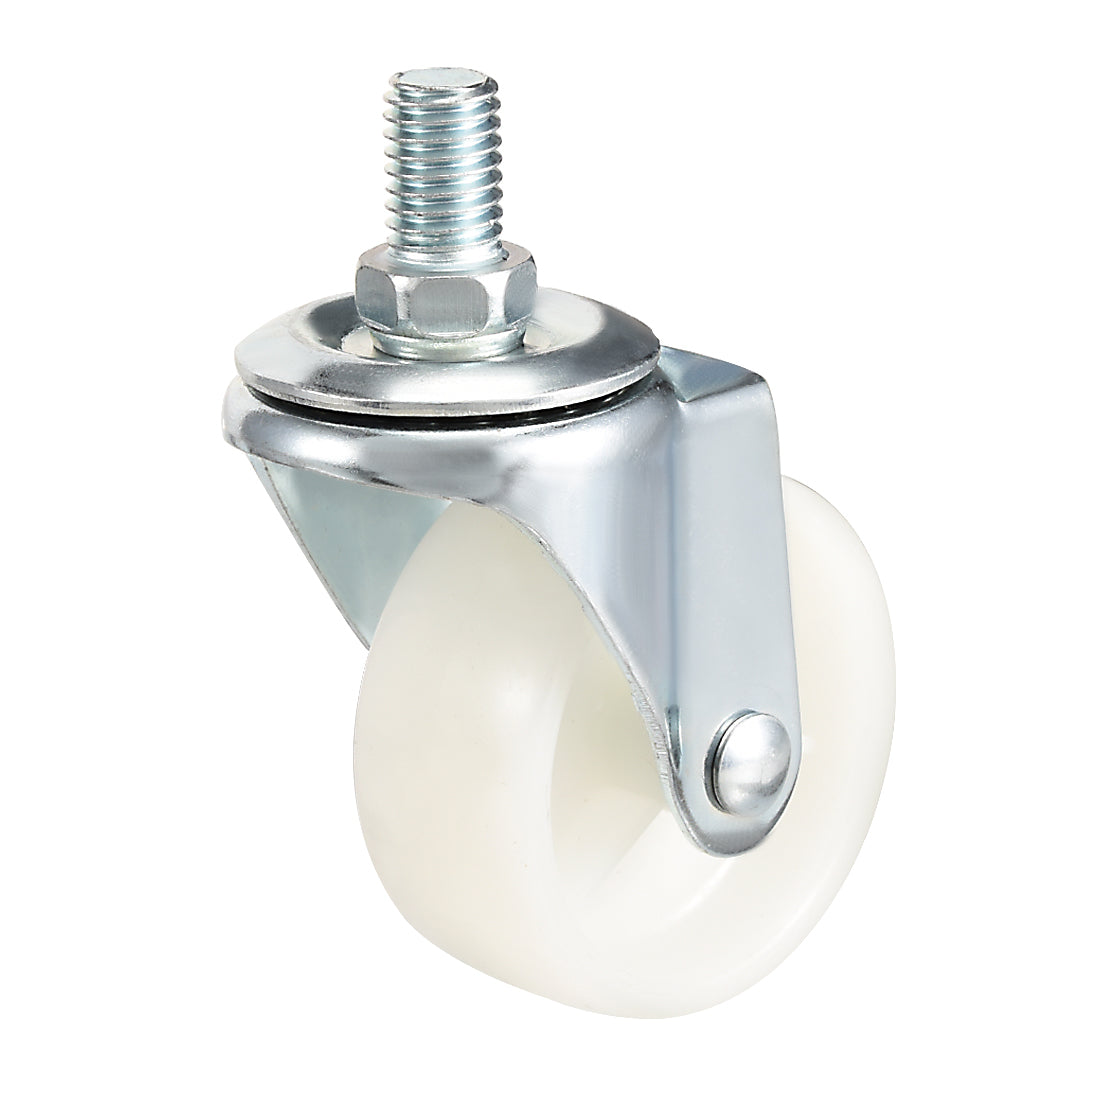 Uxcell Uxcell Swivel Casters 1.5 Inch Nylon 360 Degree M8 x 15mm Threaded Caster Wheels White 44lb Capacity 2 Pcs